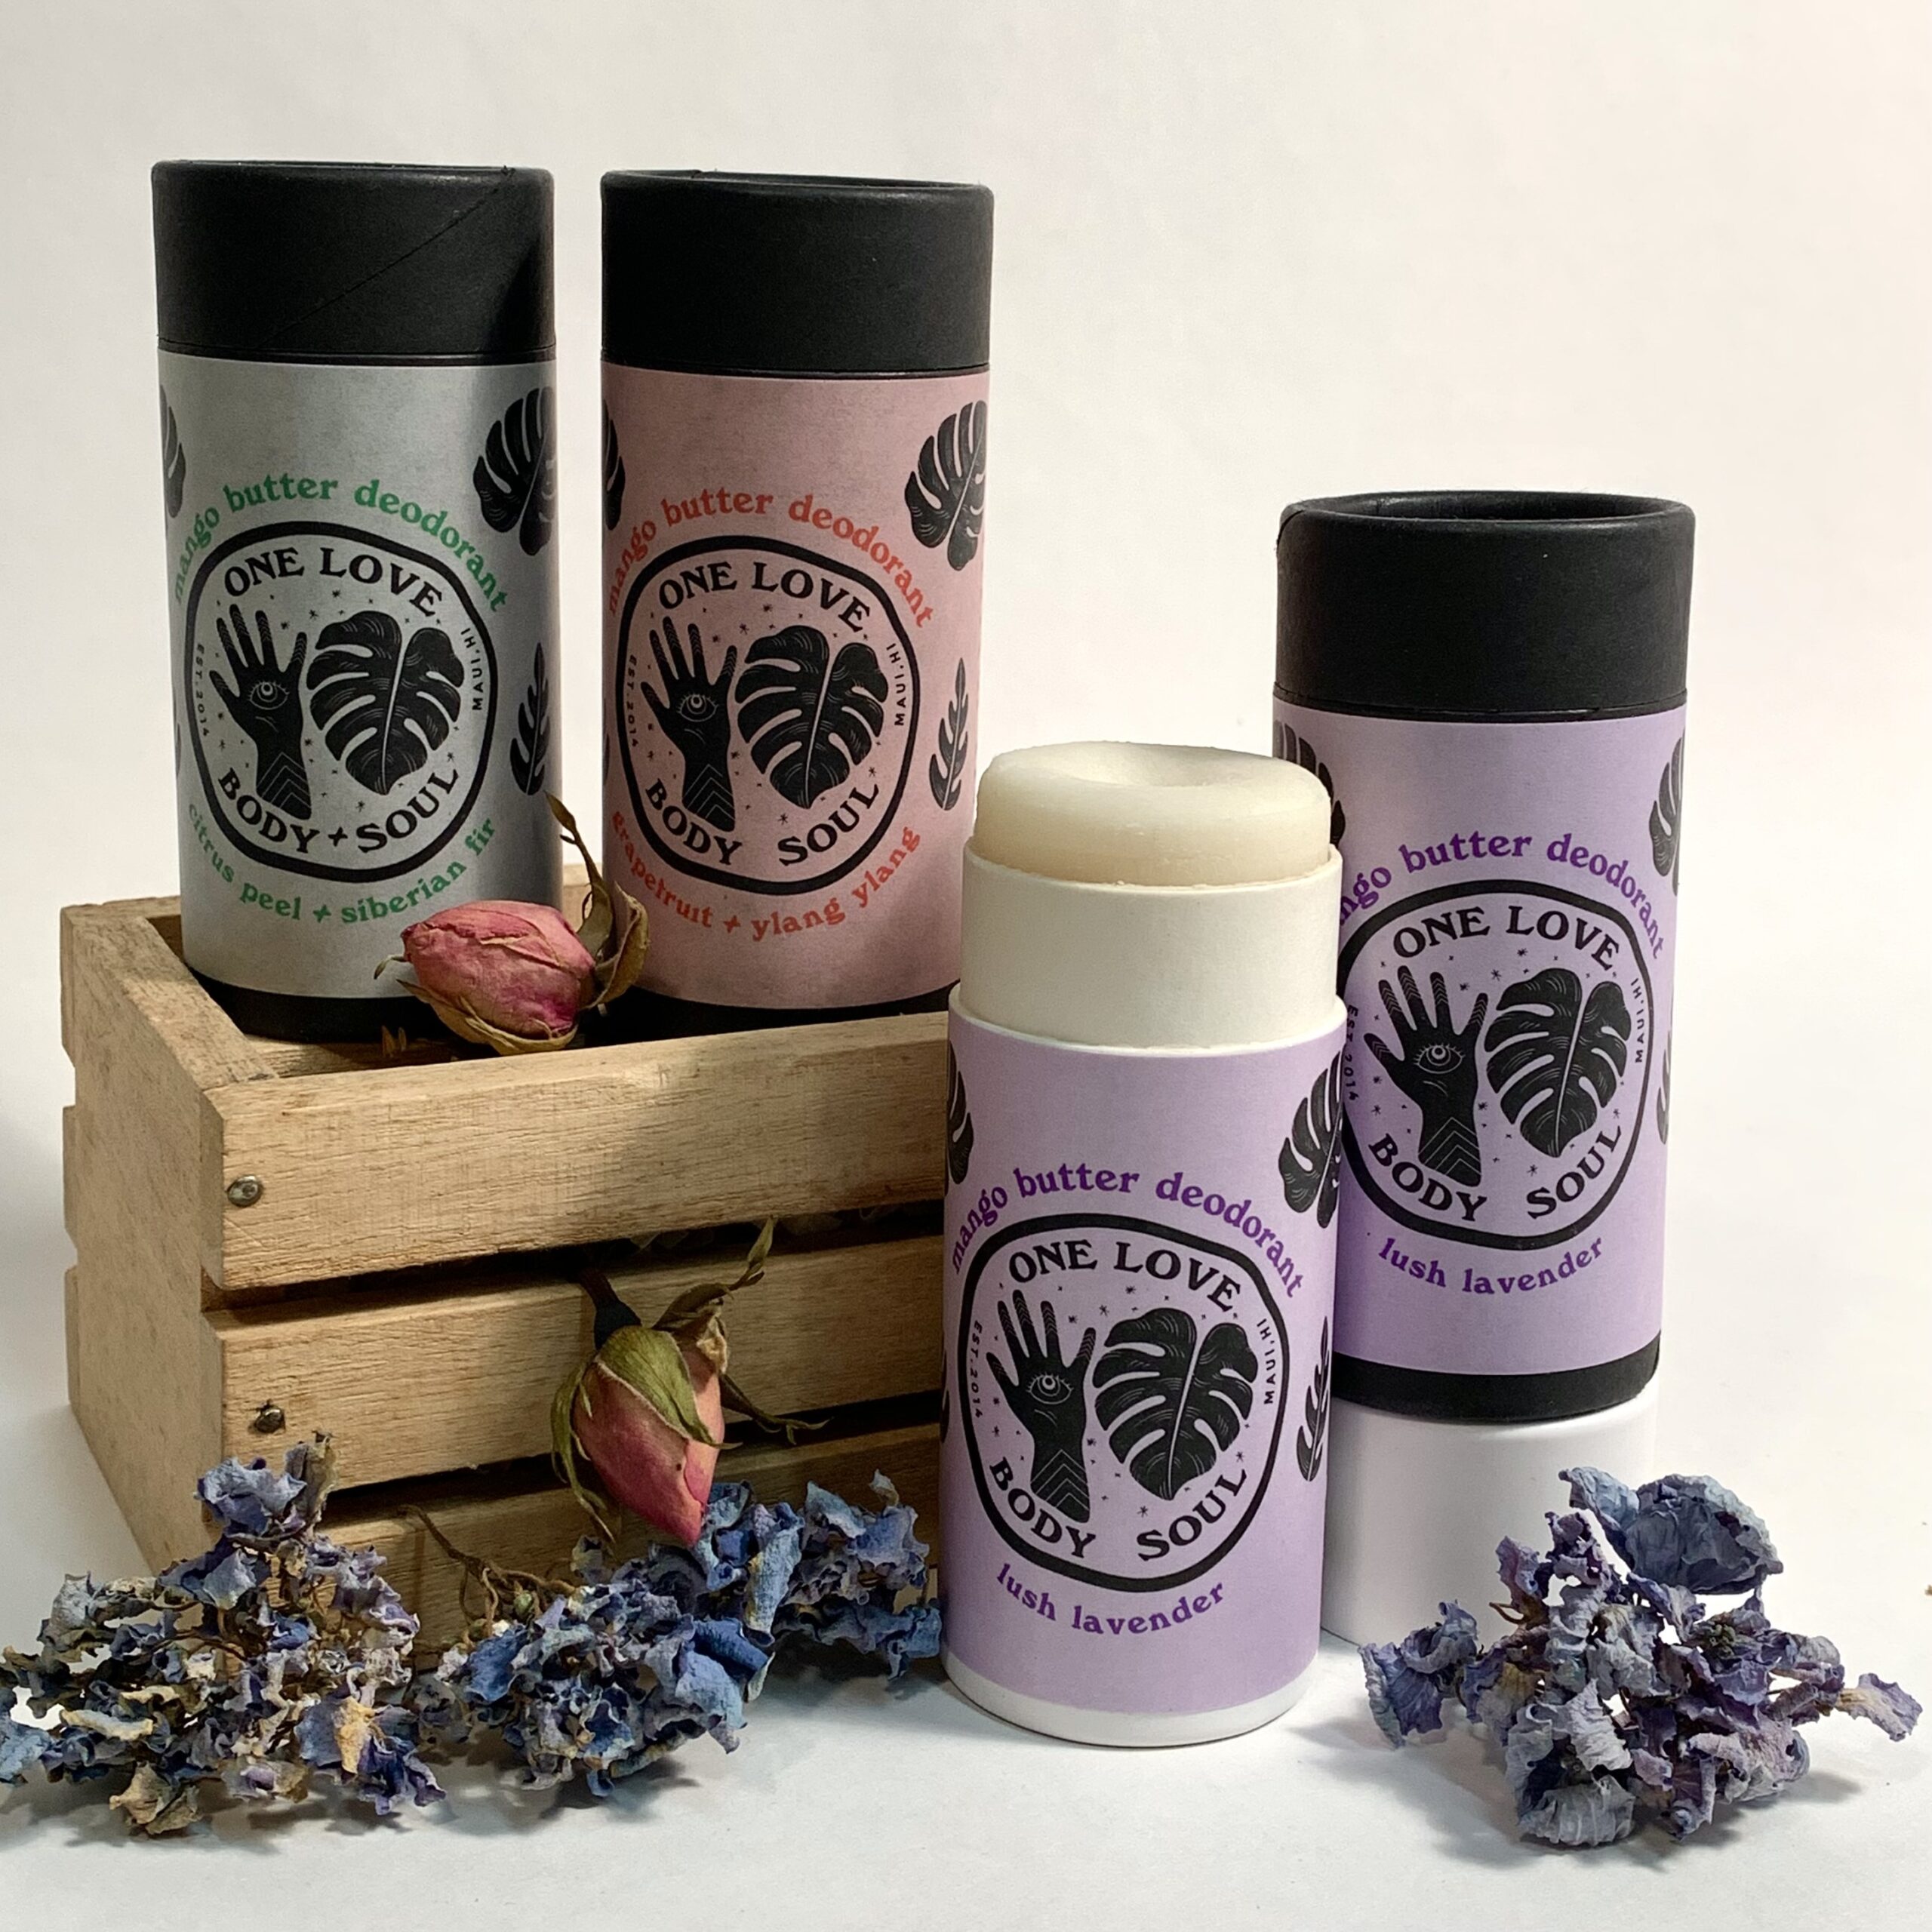 One Love Body and Soul Natural Deodorant